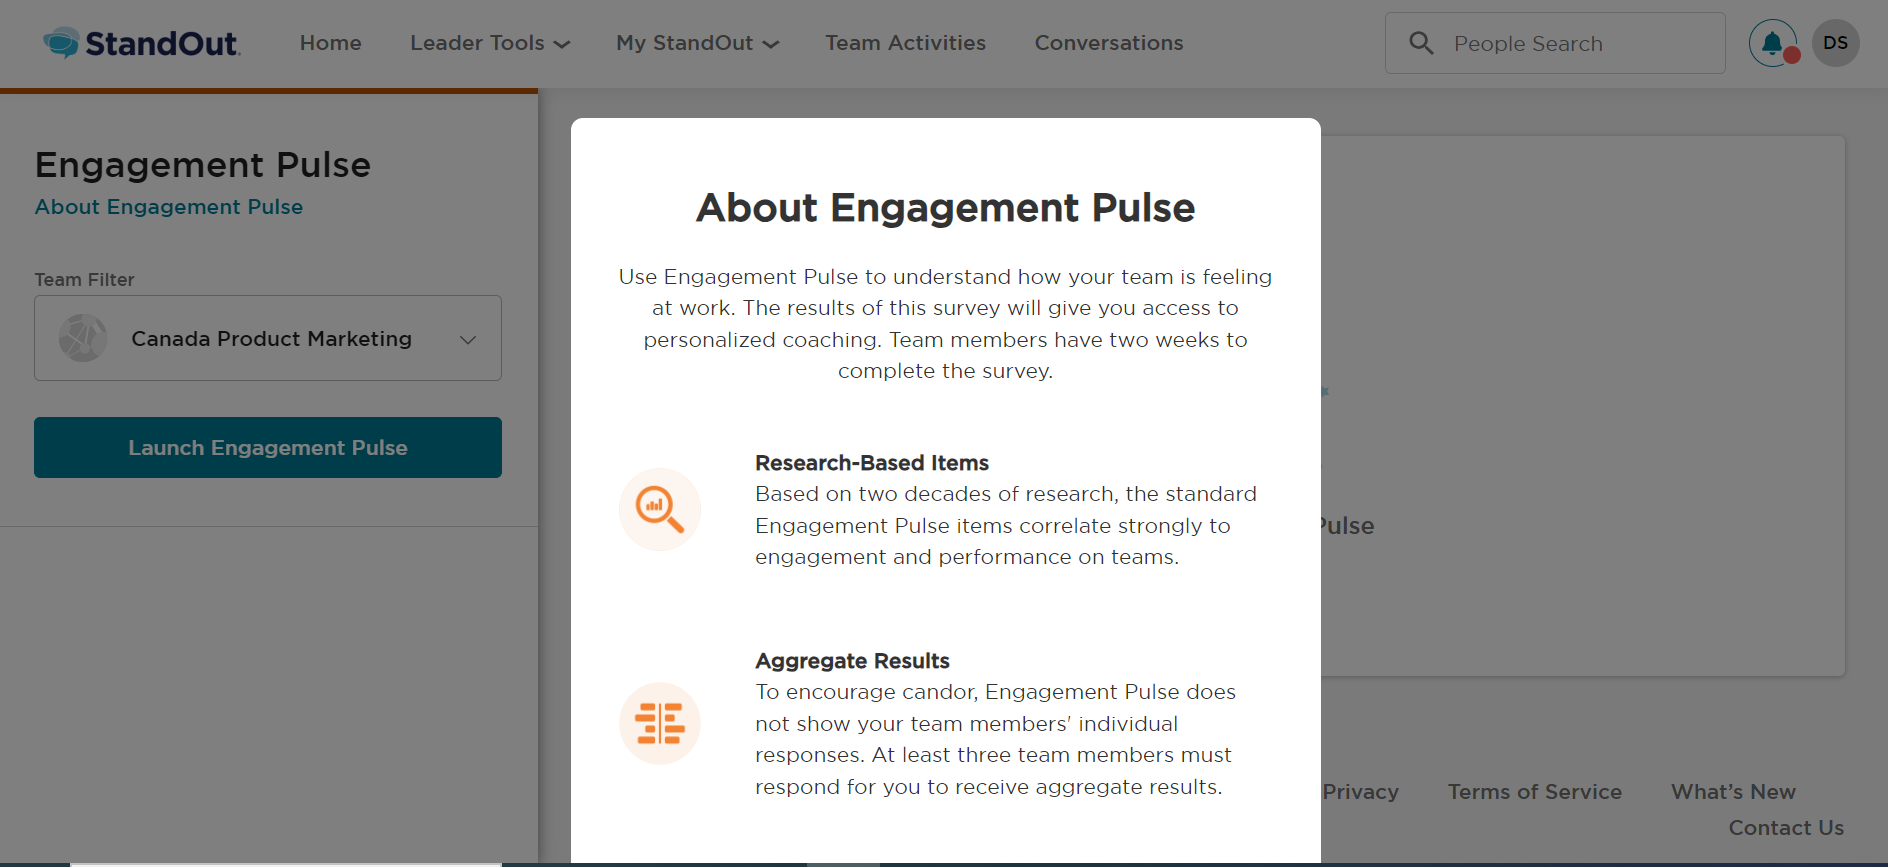 About Engagement Pulse